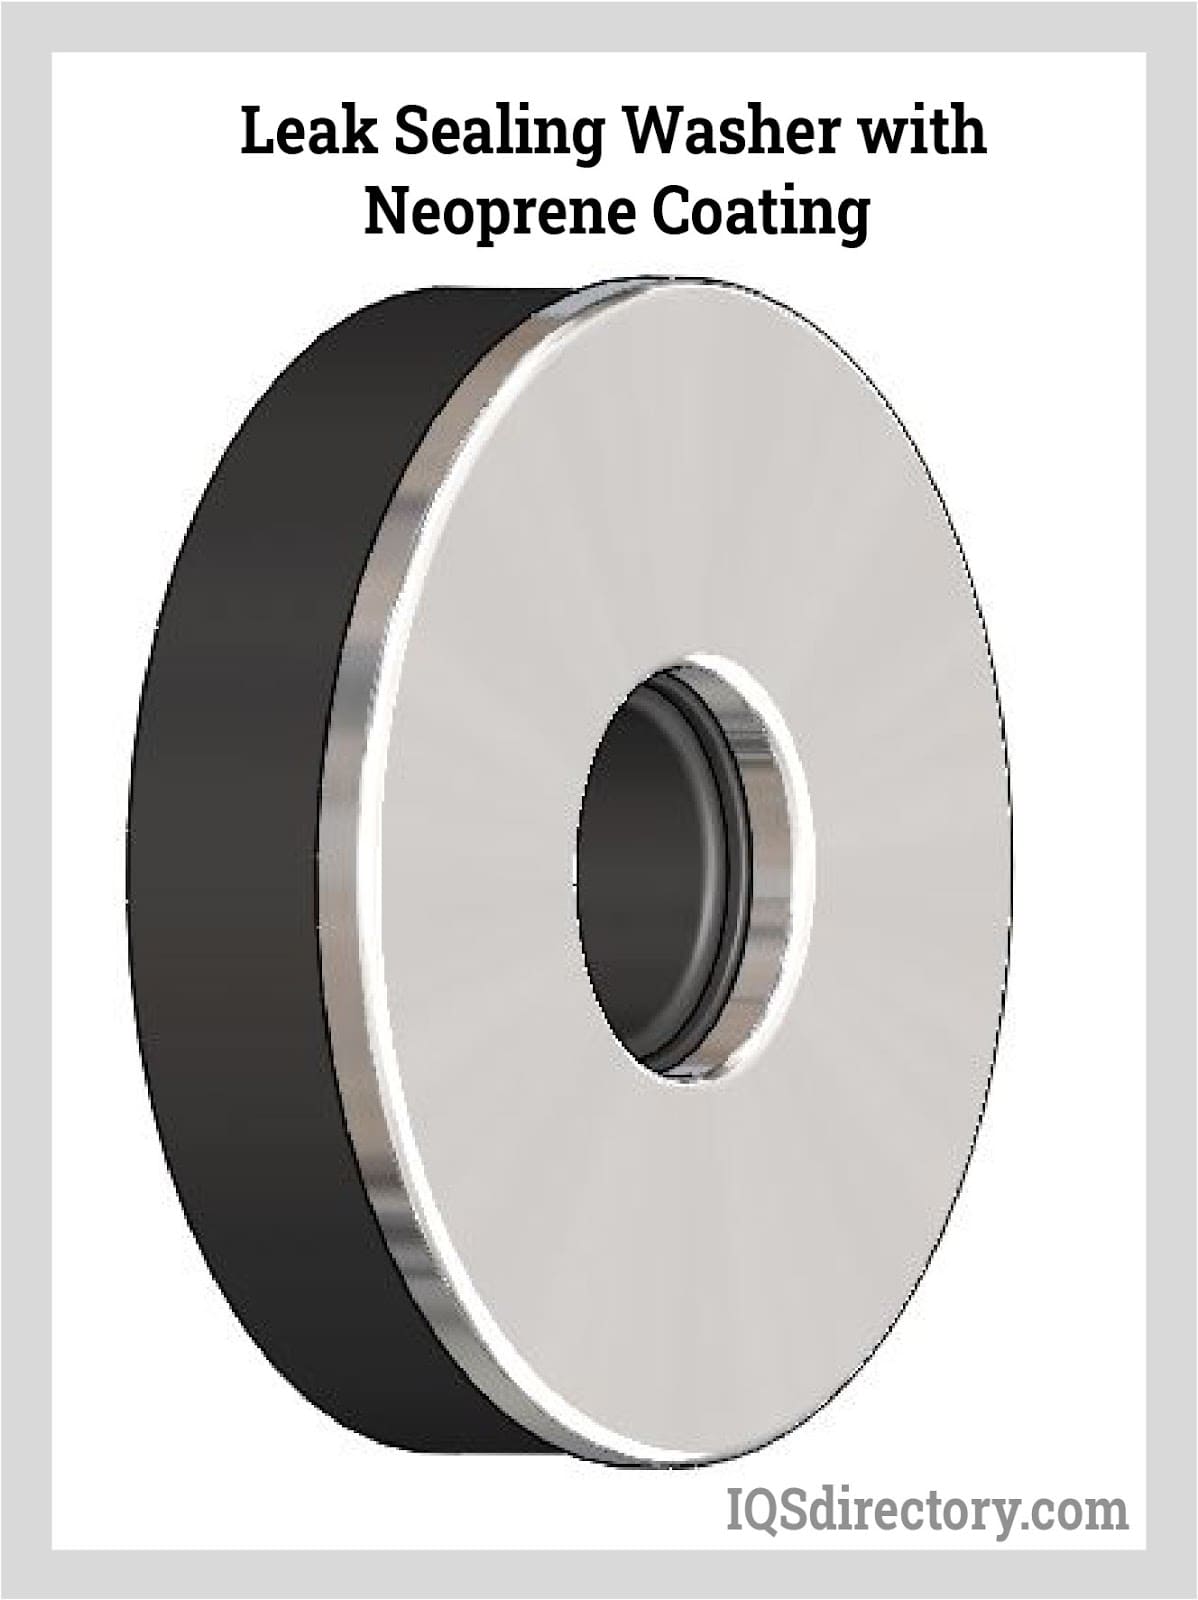 Offering Metal Washers with Smooth Finish and Close Tolerances